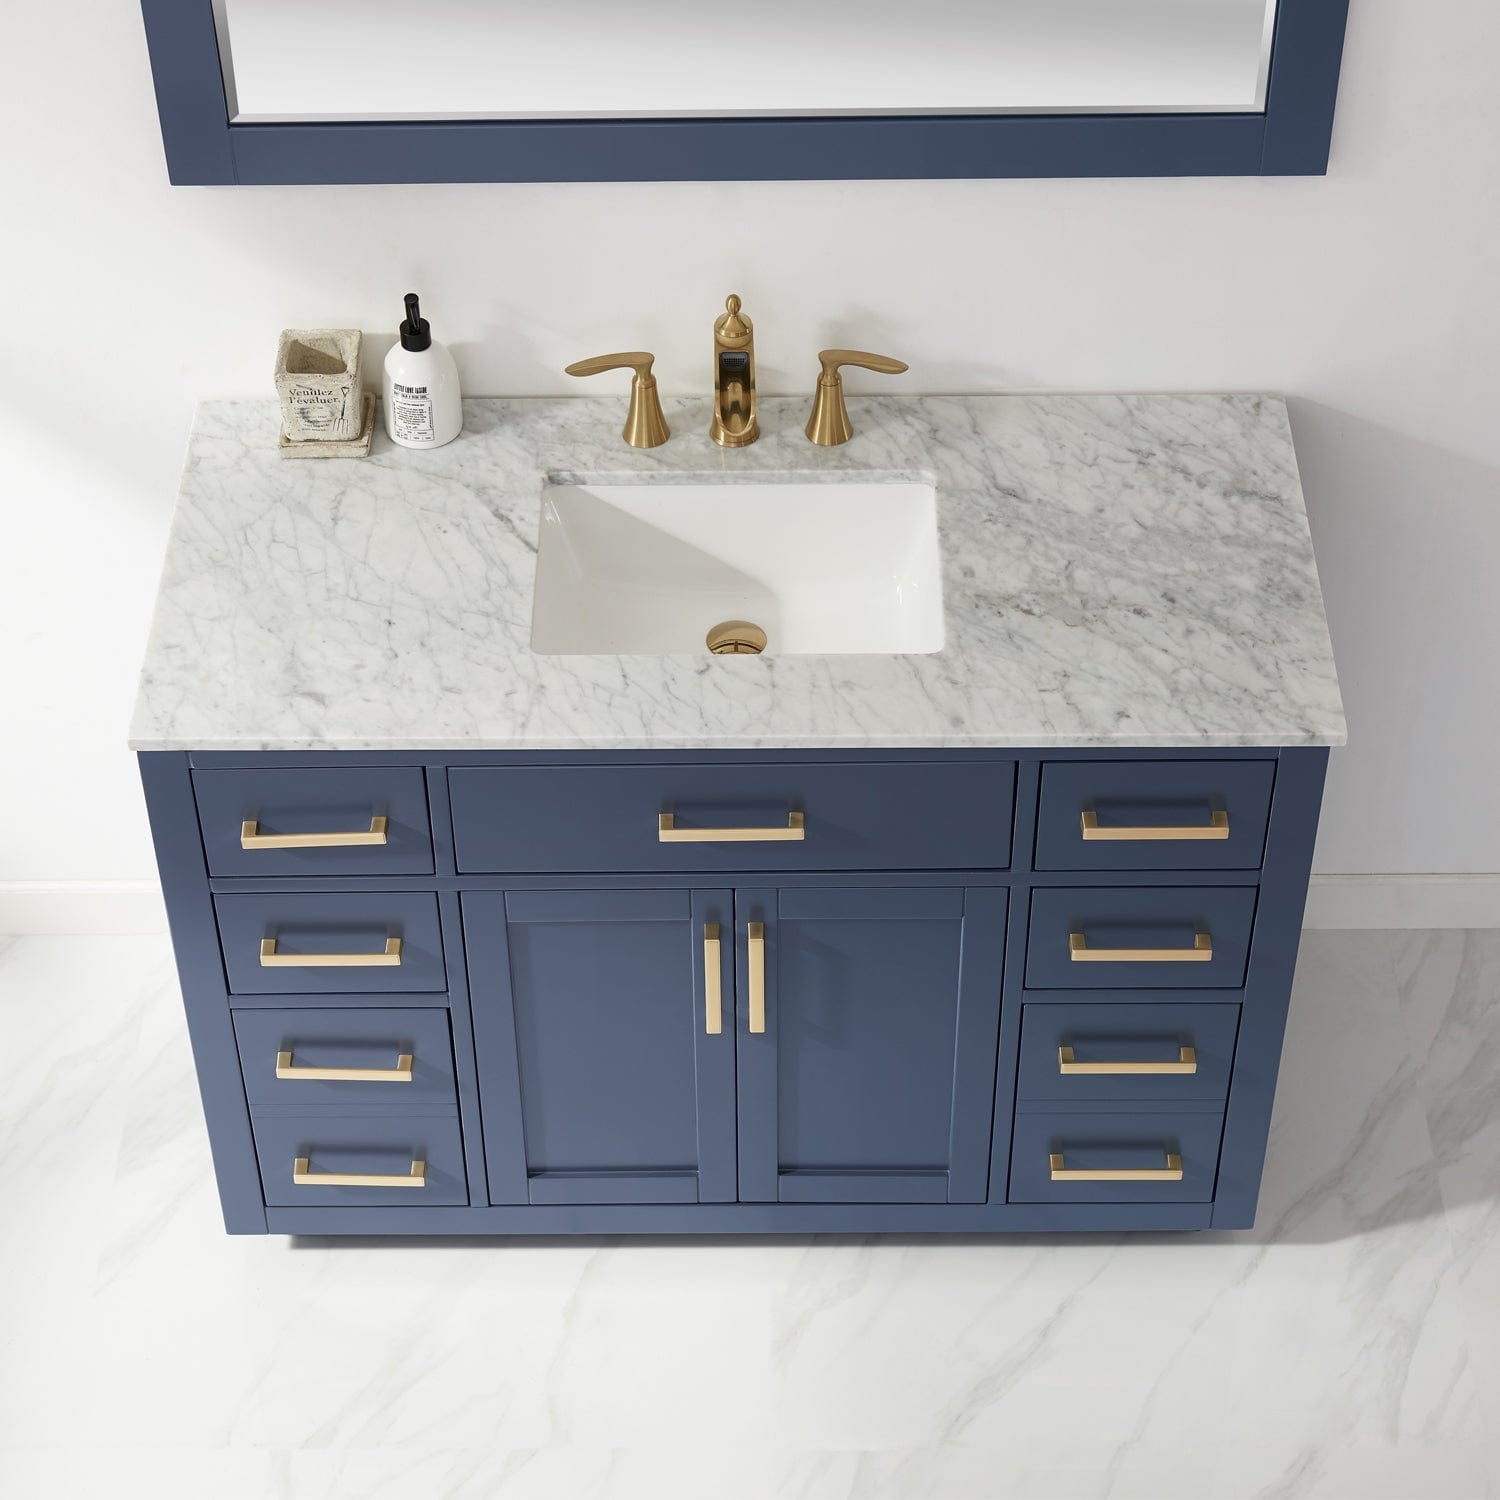 Altair Ivy 48" Single Bathroom Vanity Set in Royal Blue and Carrara White Marble Countertop with Mirror 531048-RB-CA - Molaix631112971171Vanity531048-RB-CA